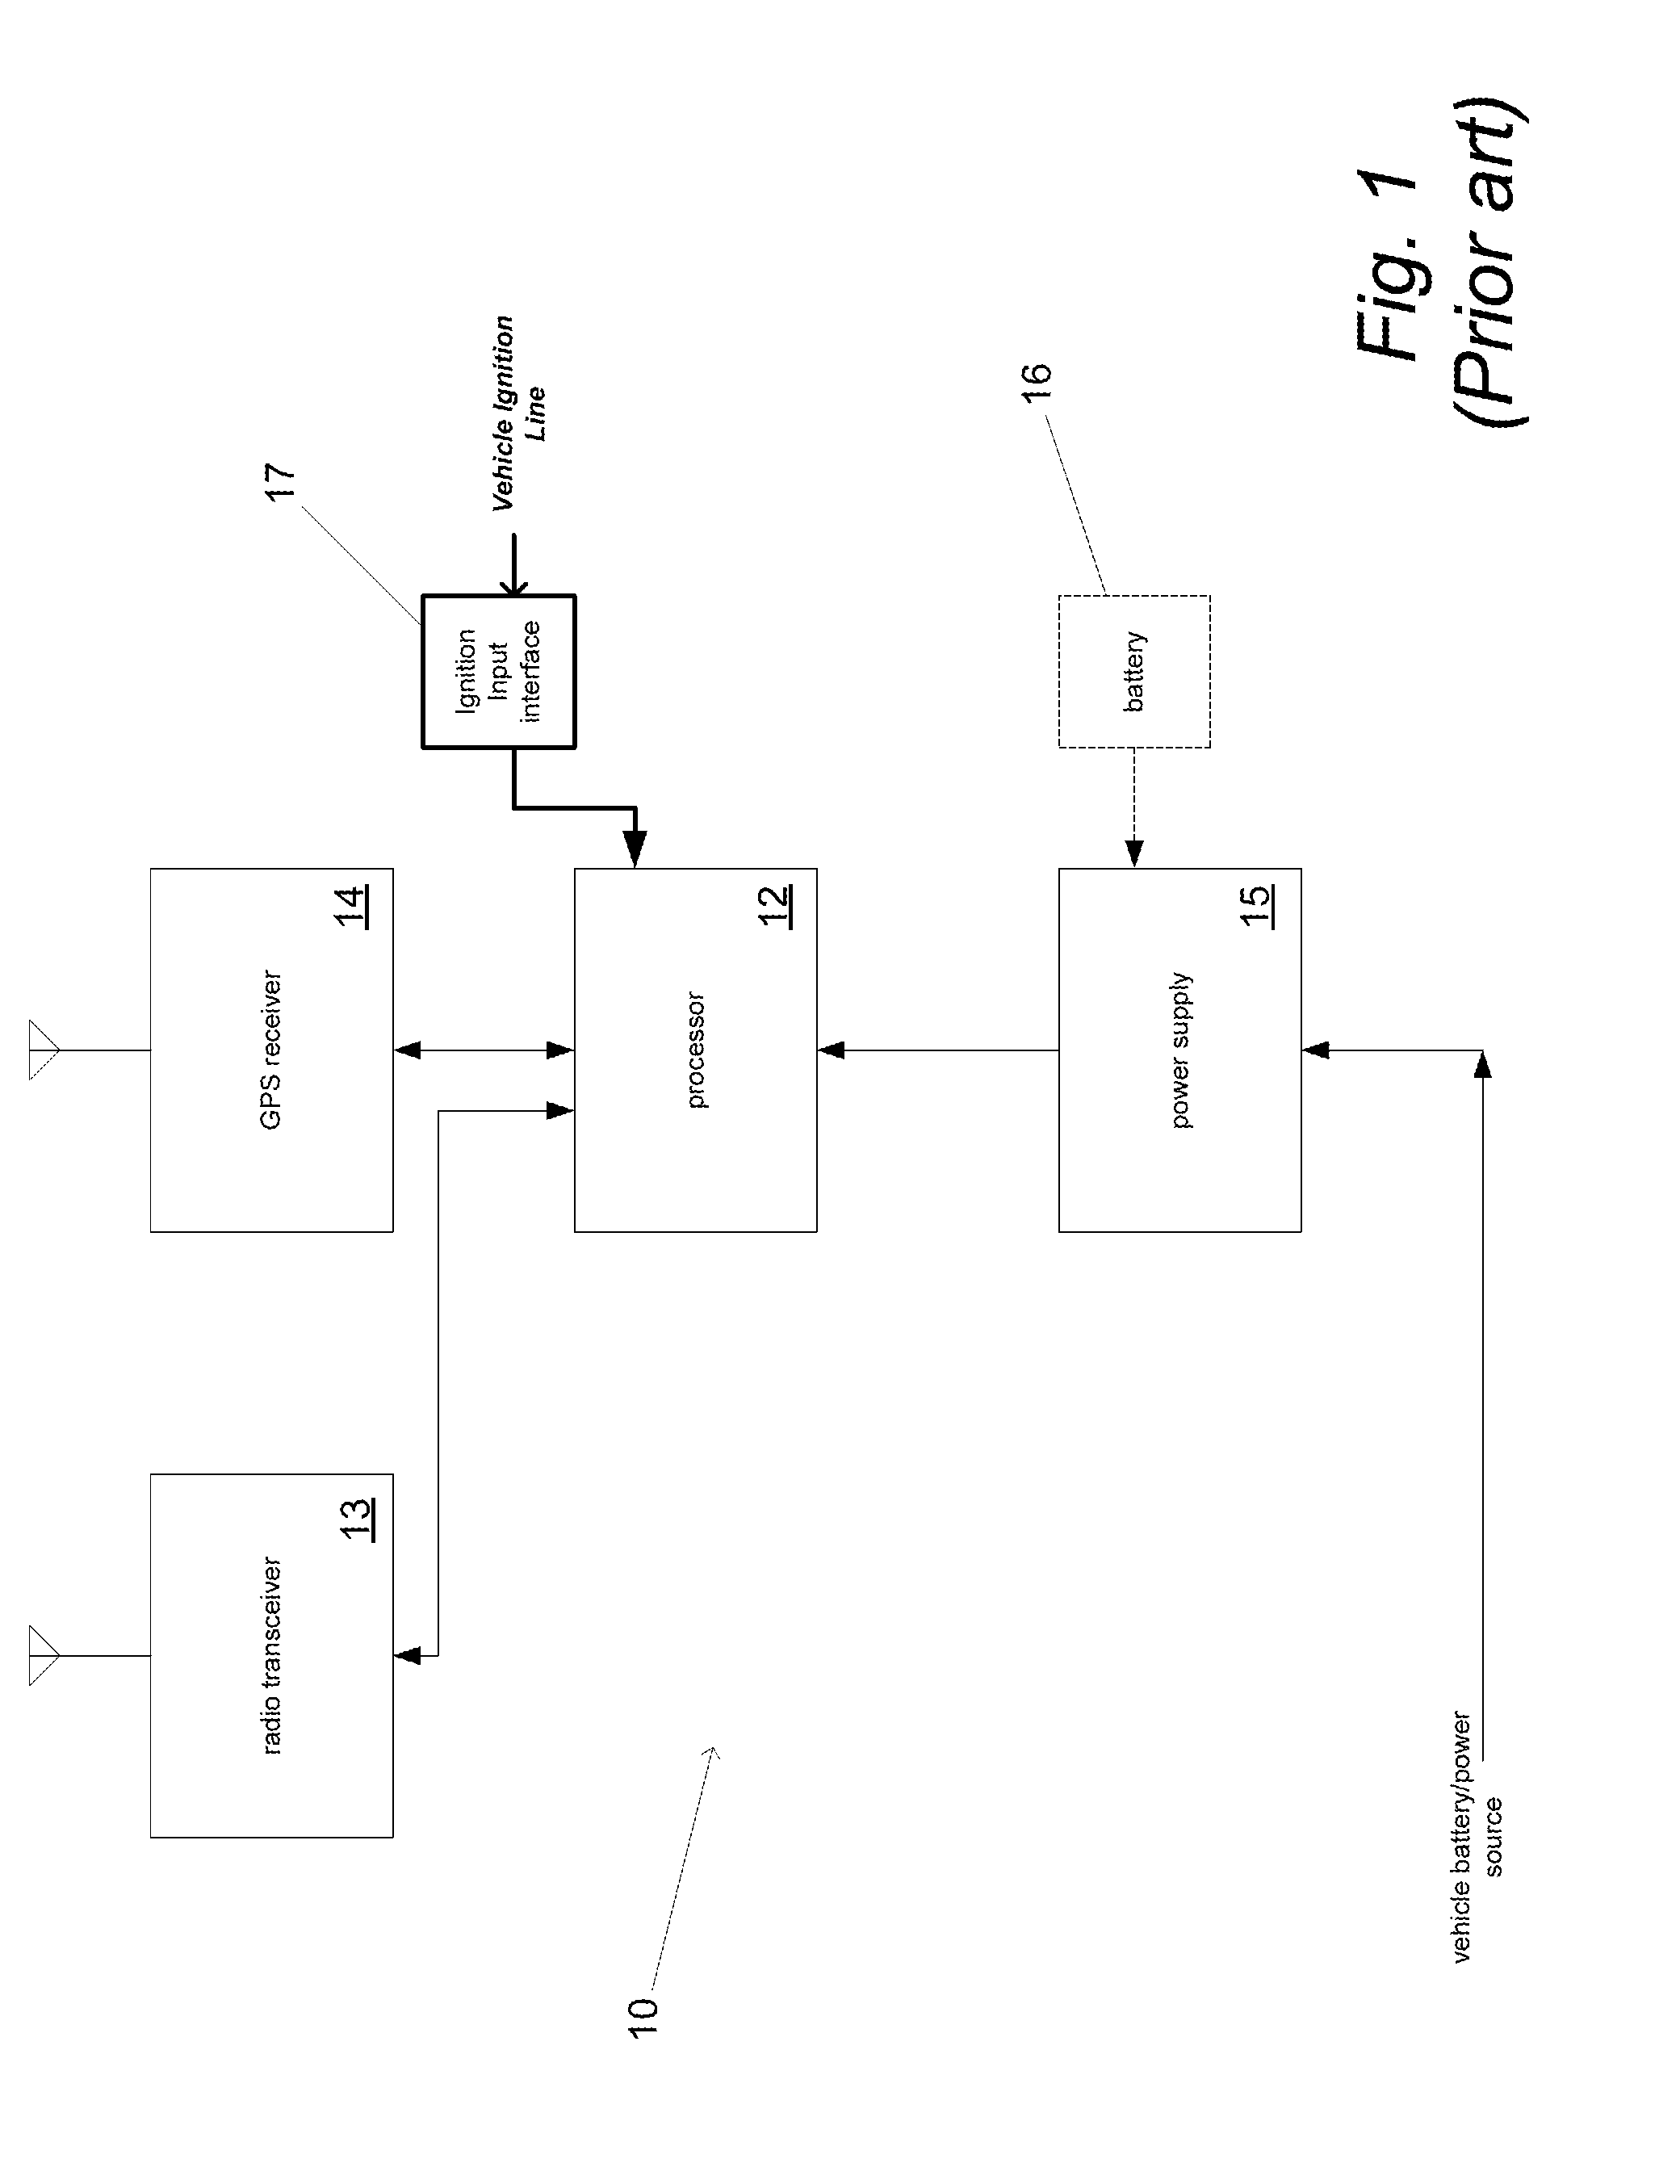 Systems and methods for virtual ignition detection